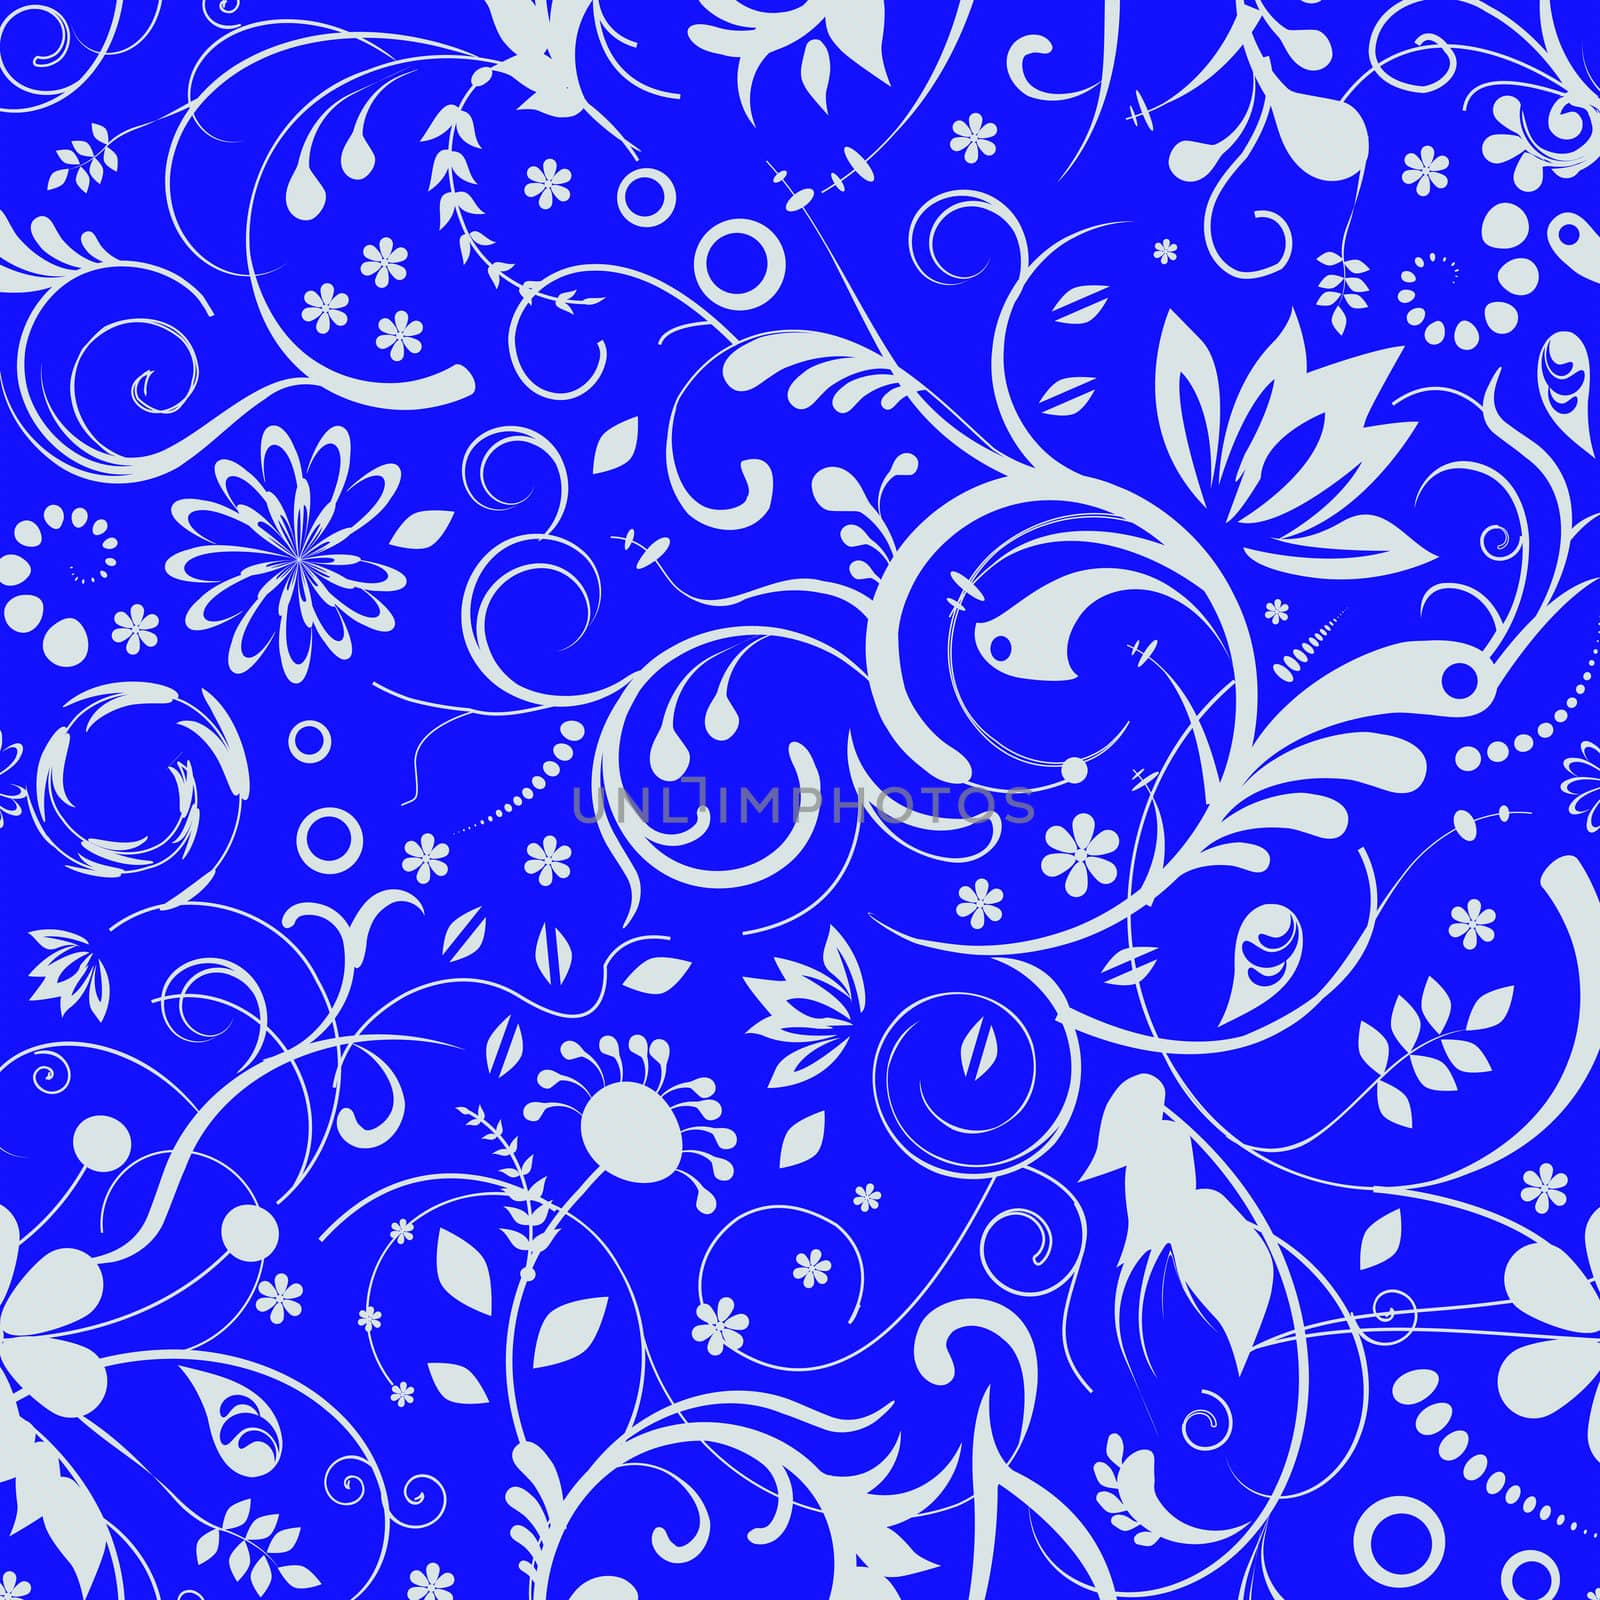 blue Damask Seamless floral Pattern background texture